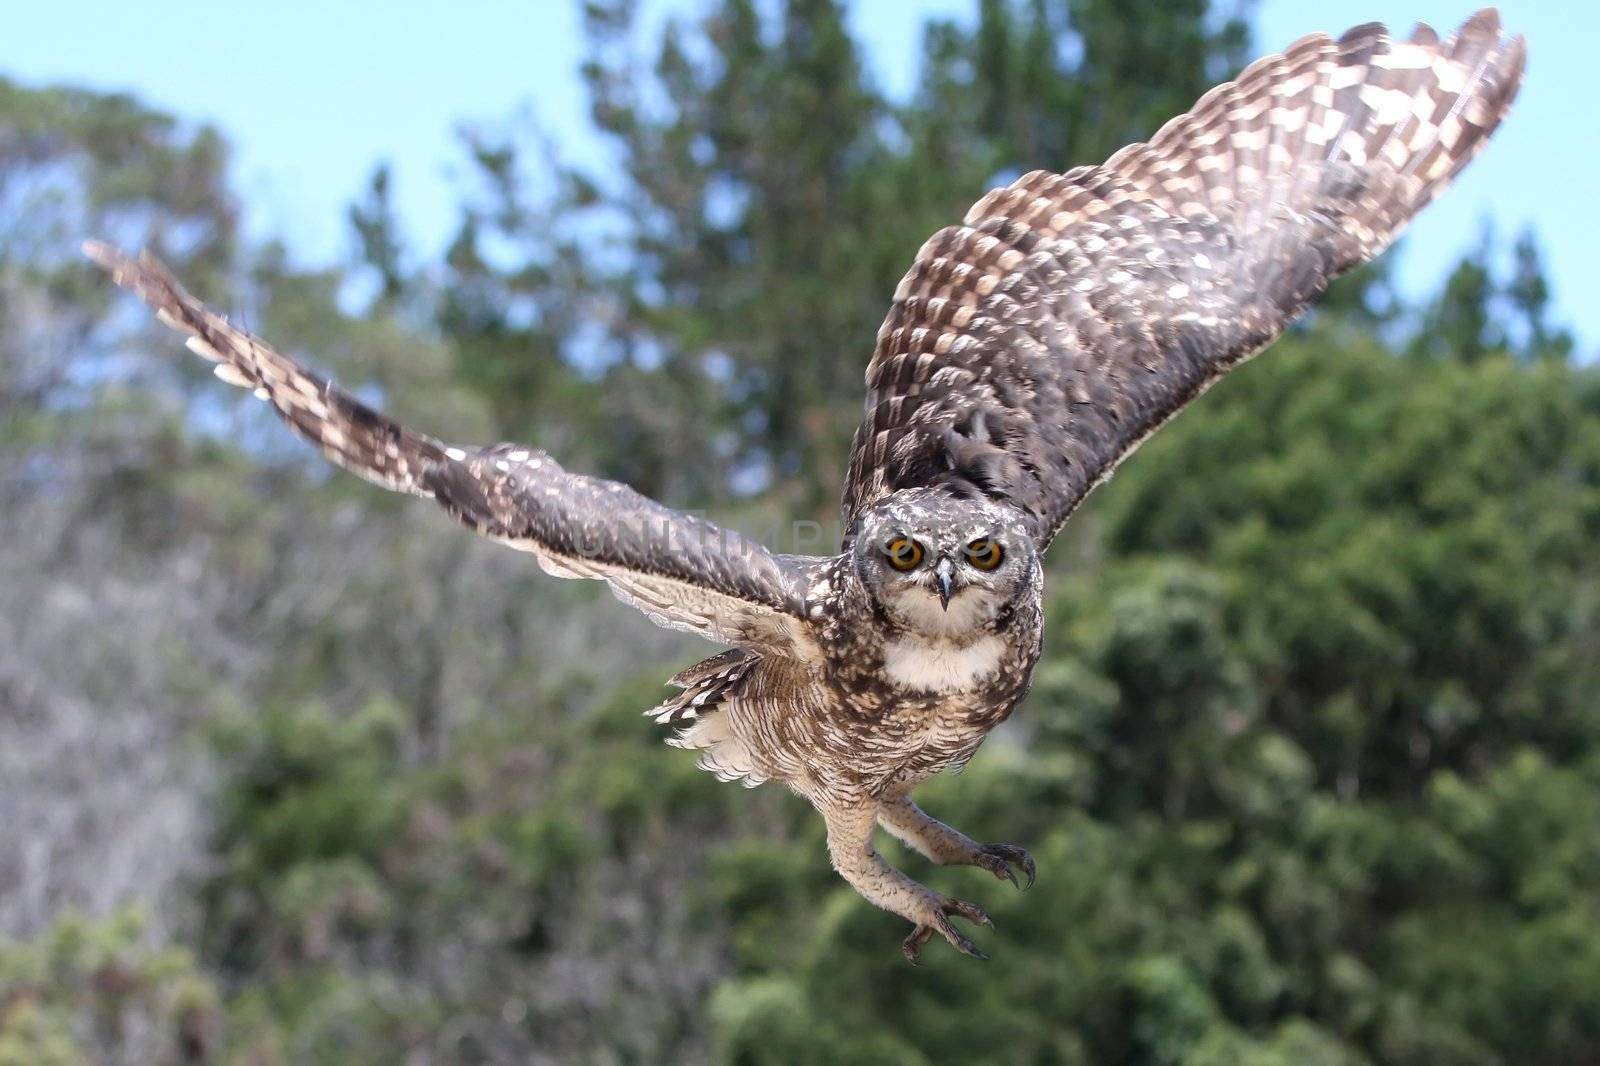 Spotted Eagle Owl raptor coming in to land